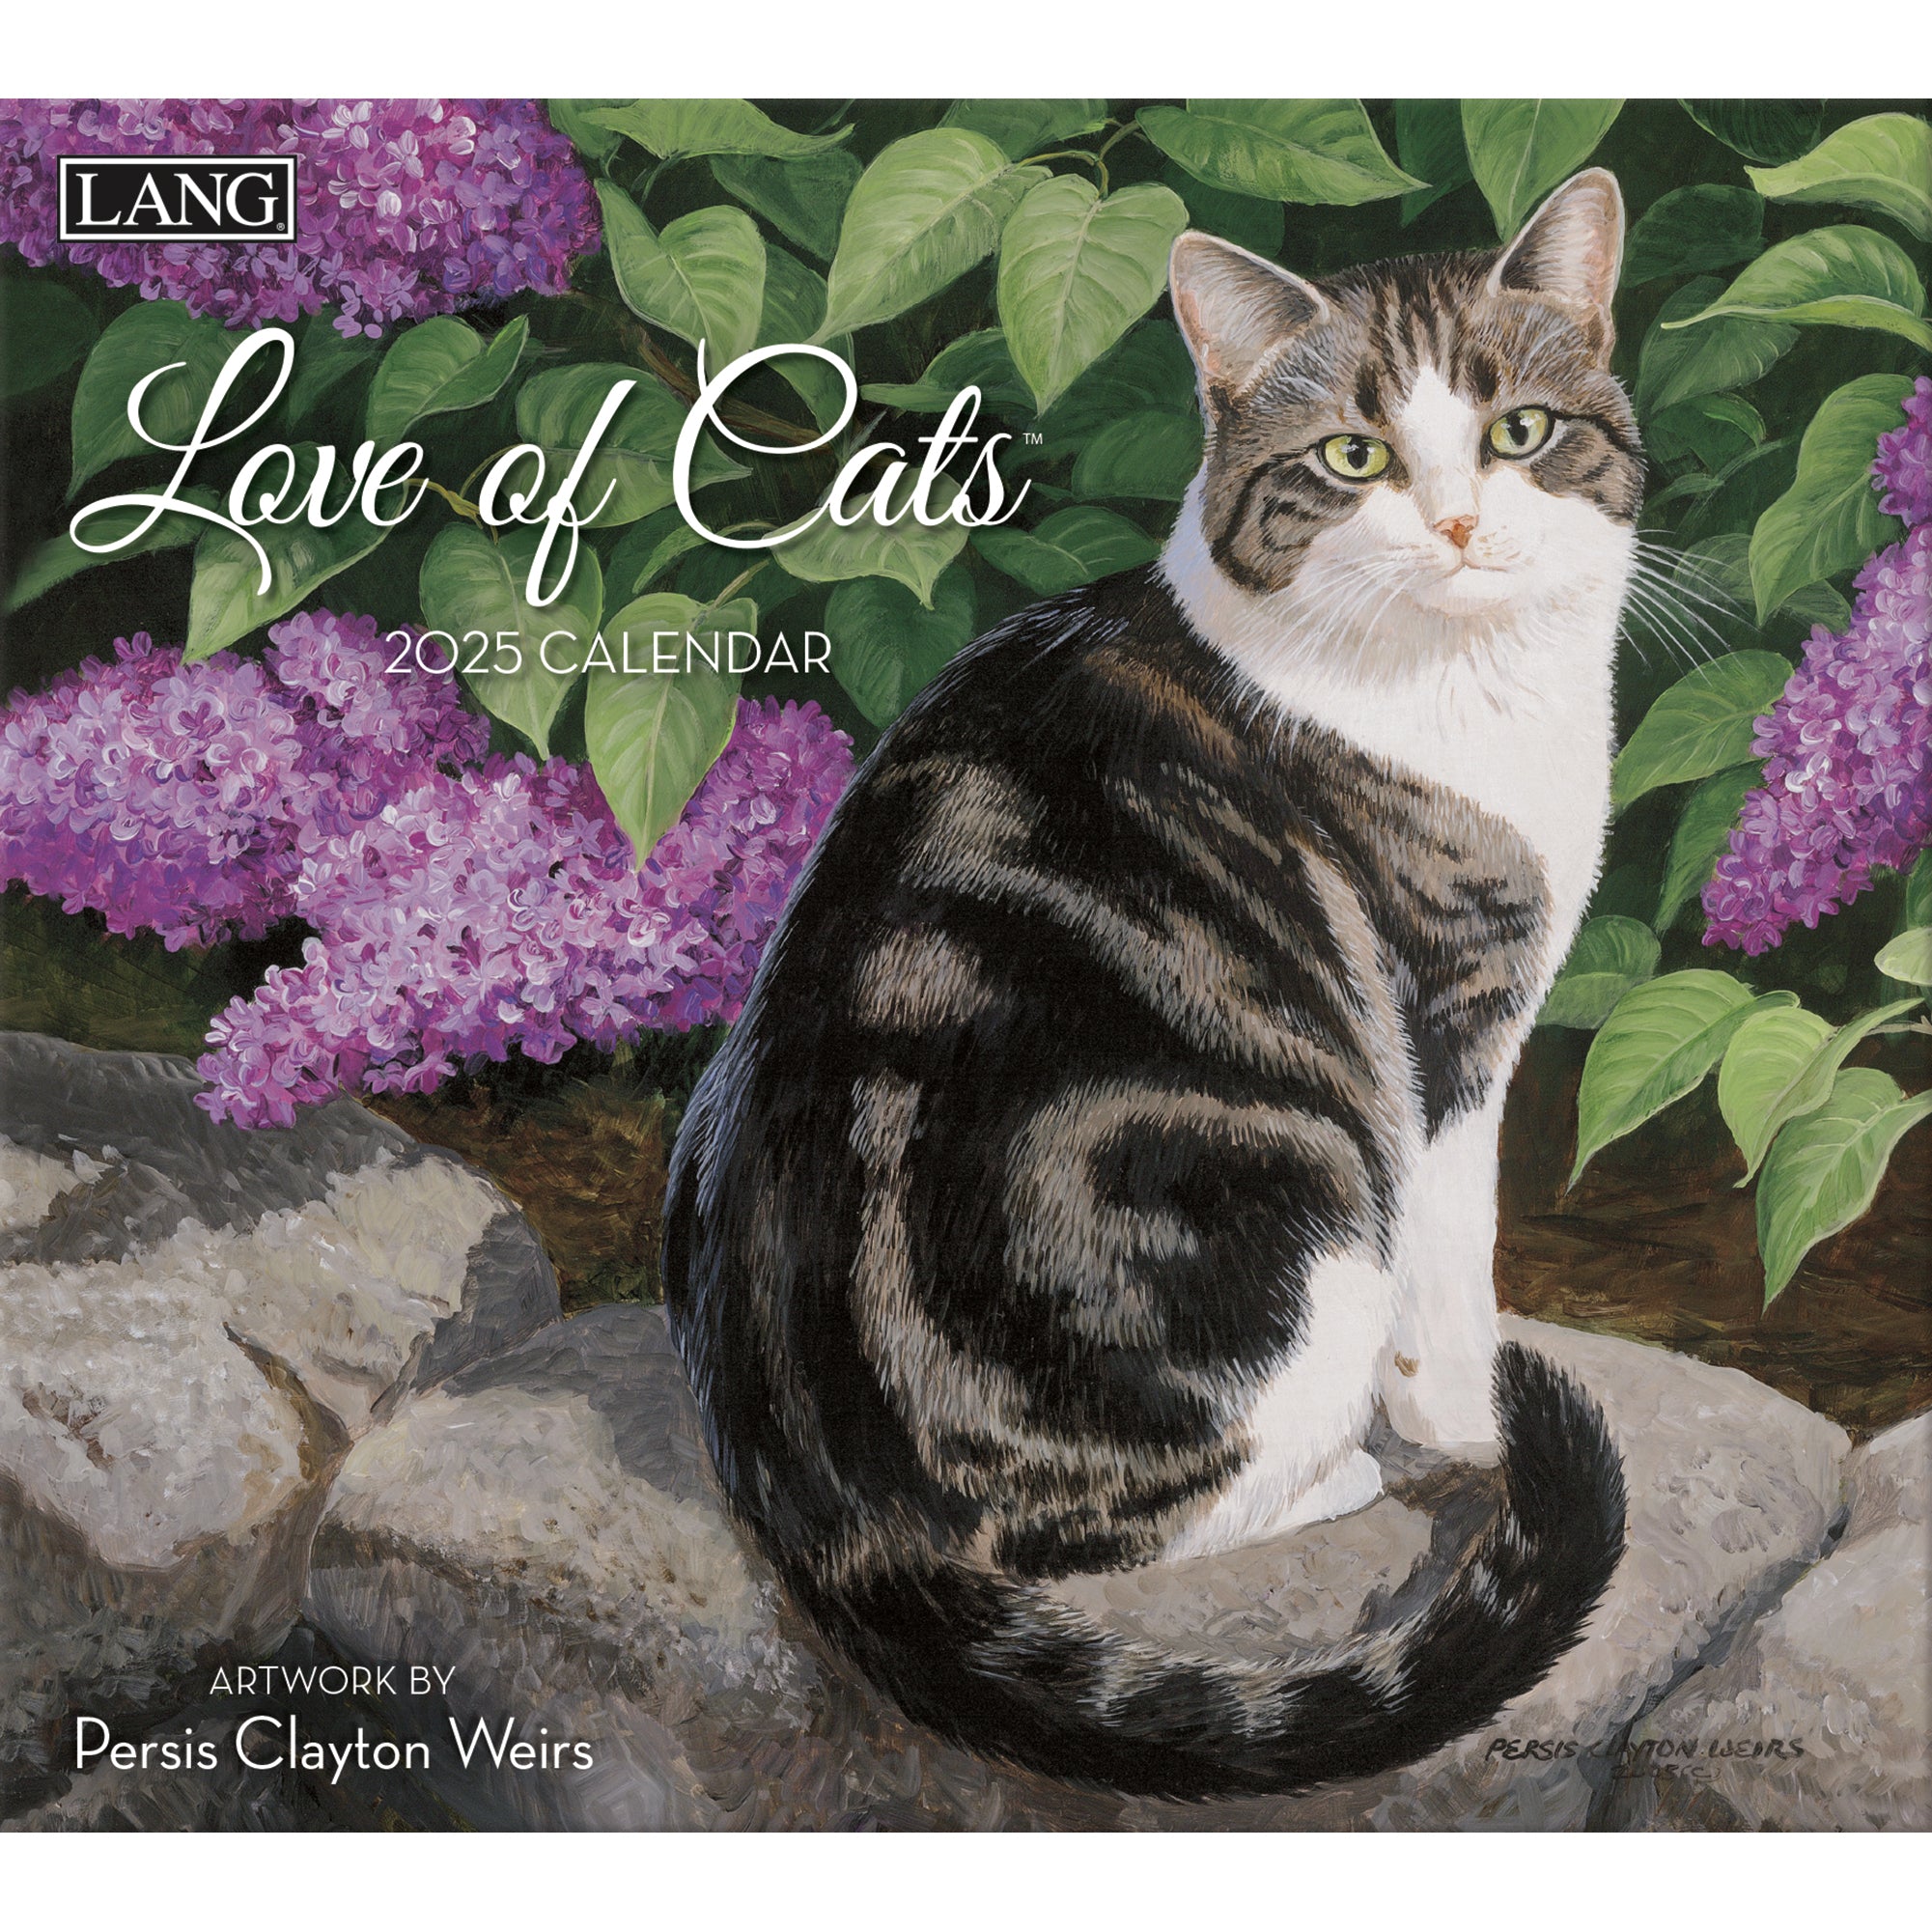 2025 Love Of Cats By Persis Clayton Weirs - LANG Deluxe Wall Calendar